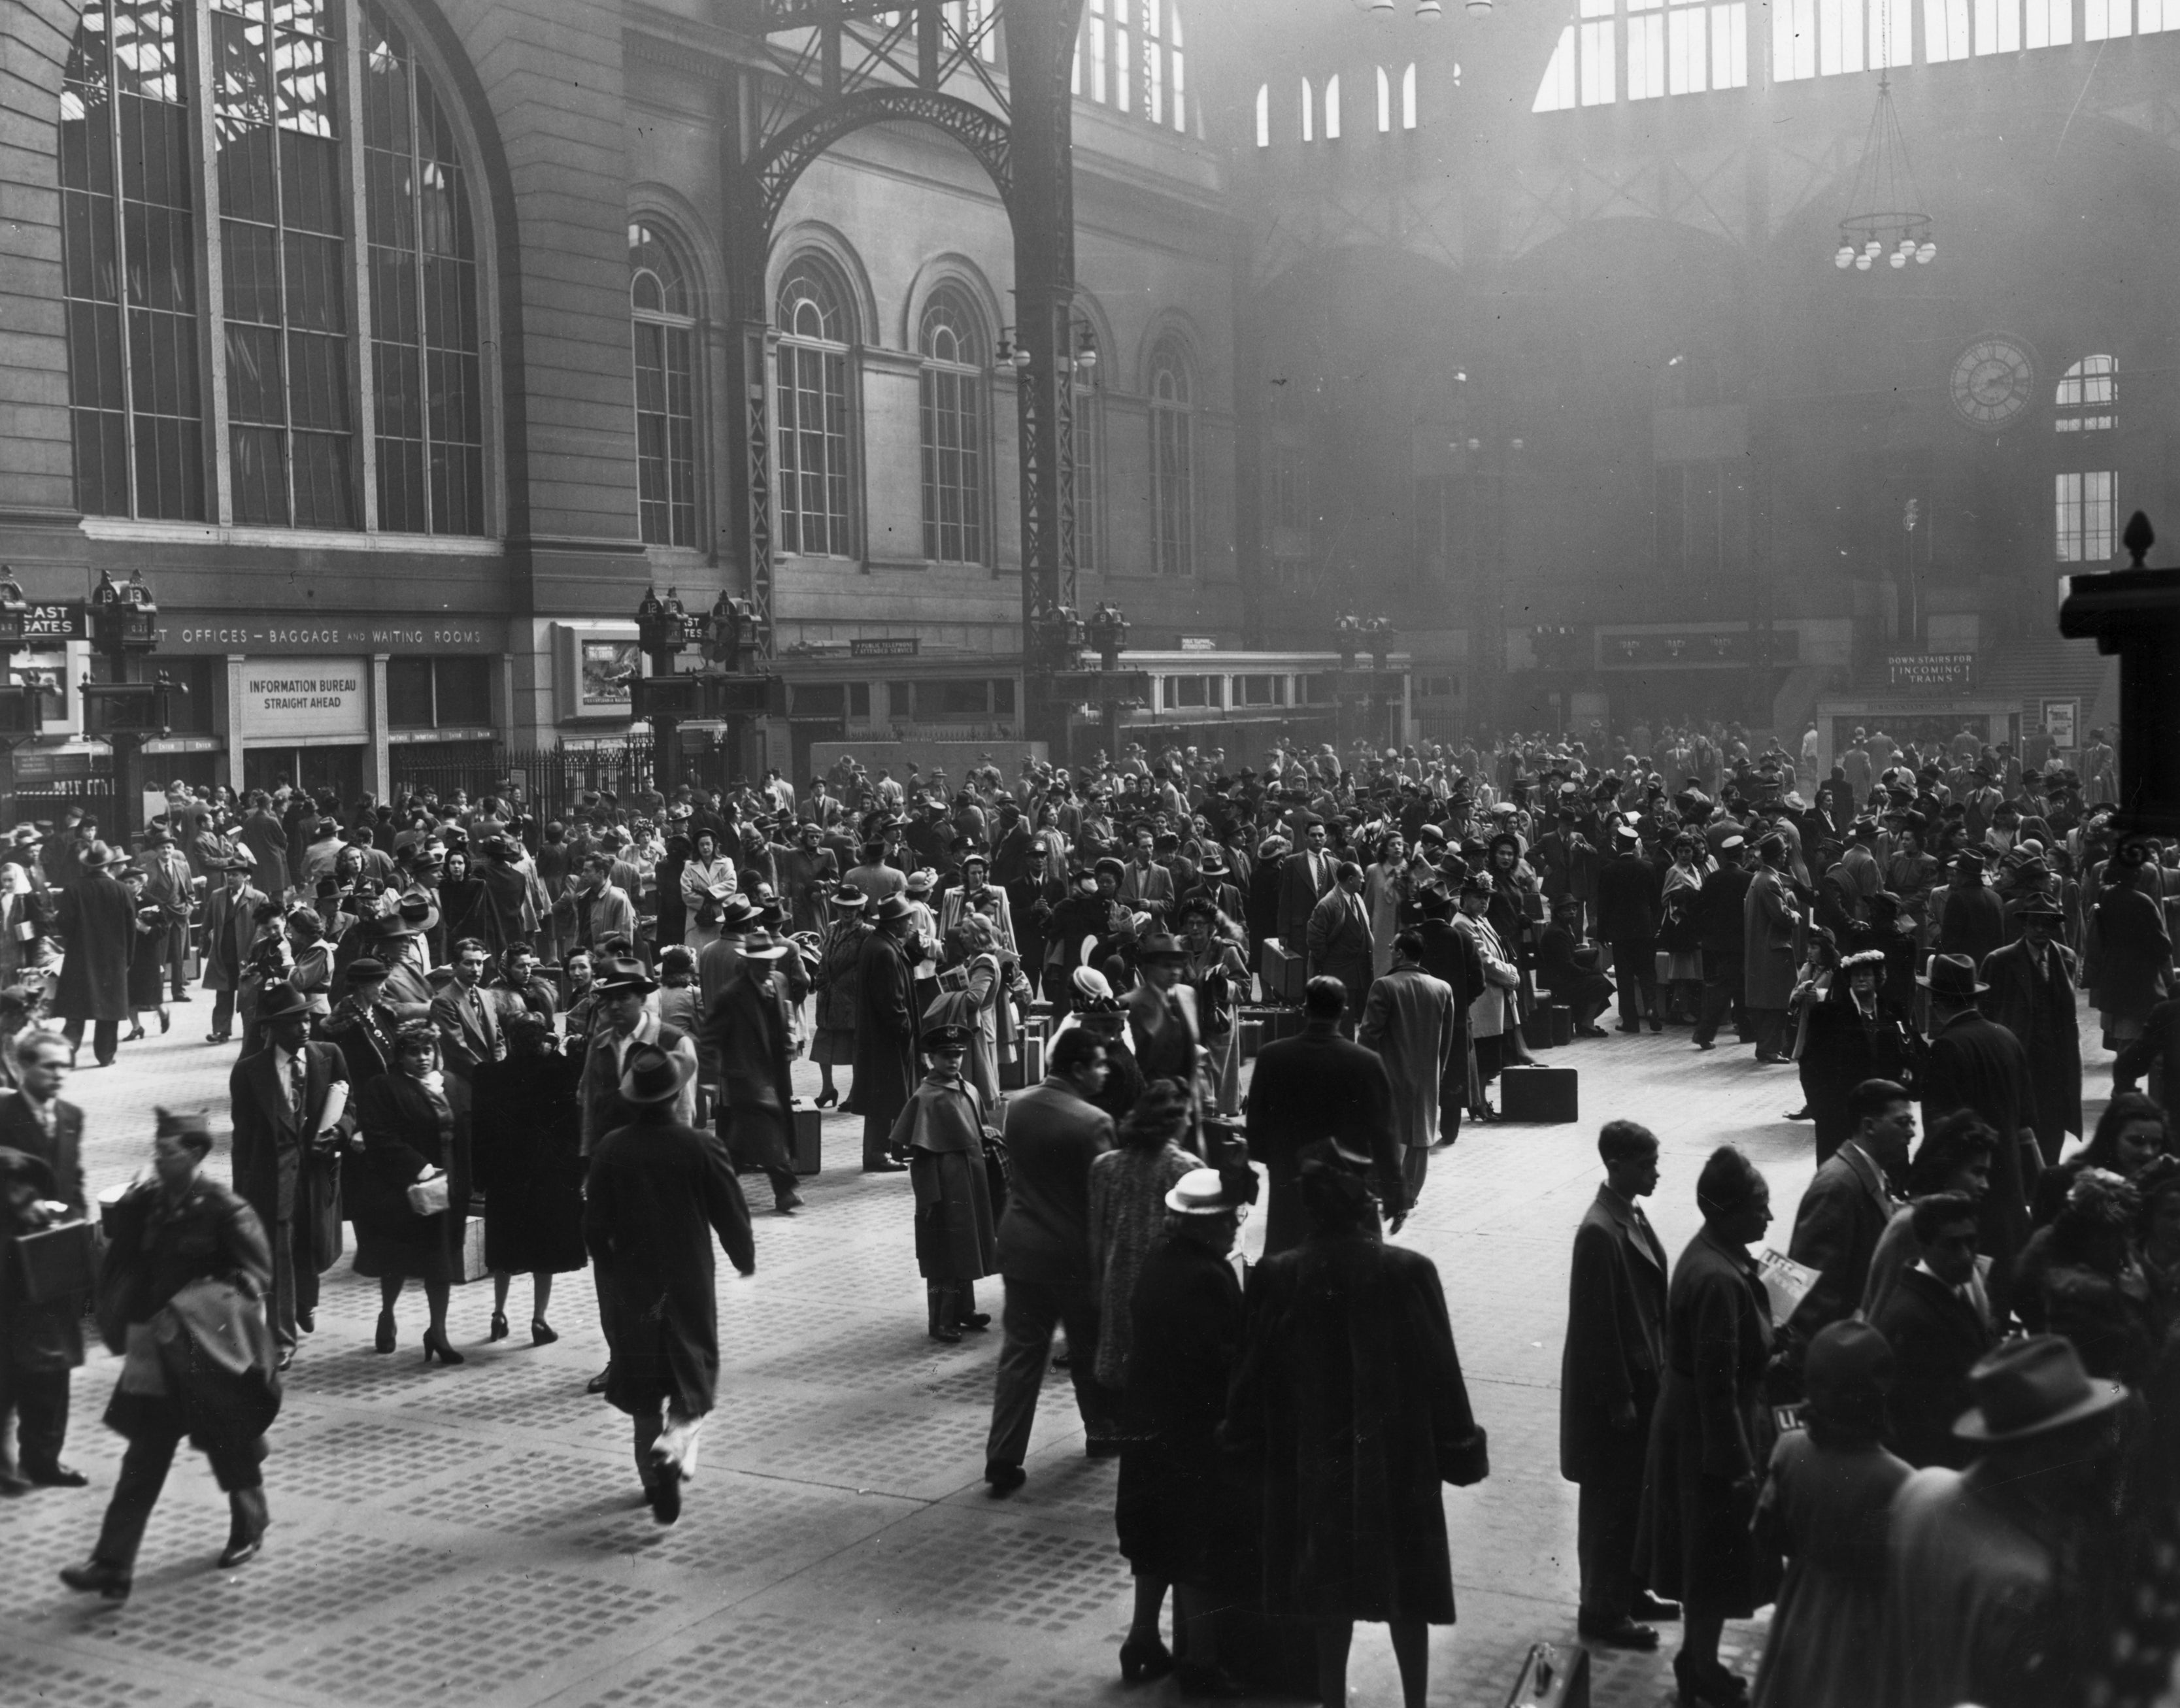 View of a crowd of people in the interior of the old Pennsylvania Rail Road Station, New York City, circa 1950